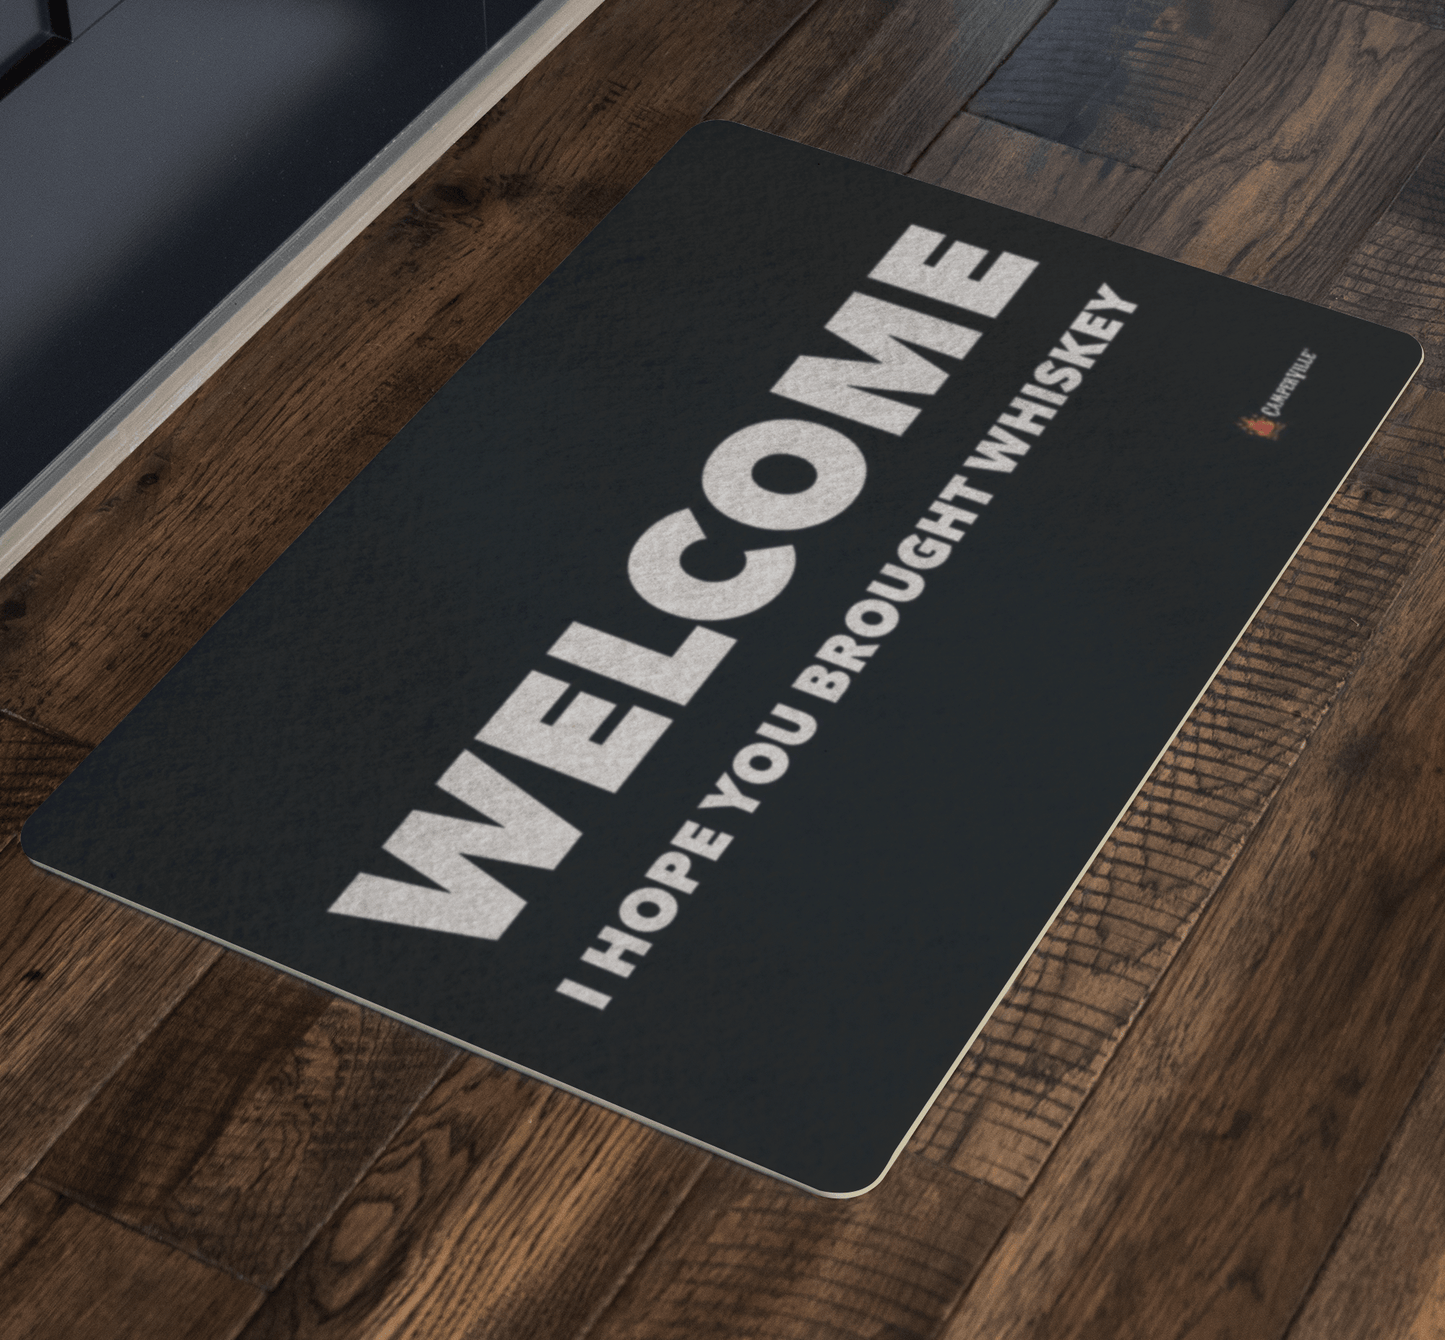 "Welcome - I Hope You Brought Whiskey" Doormat